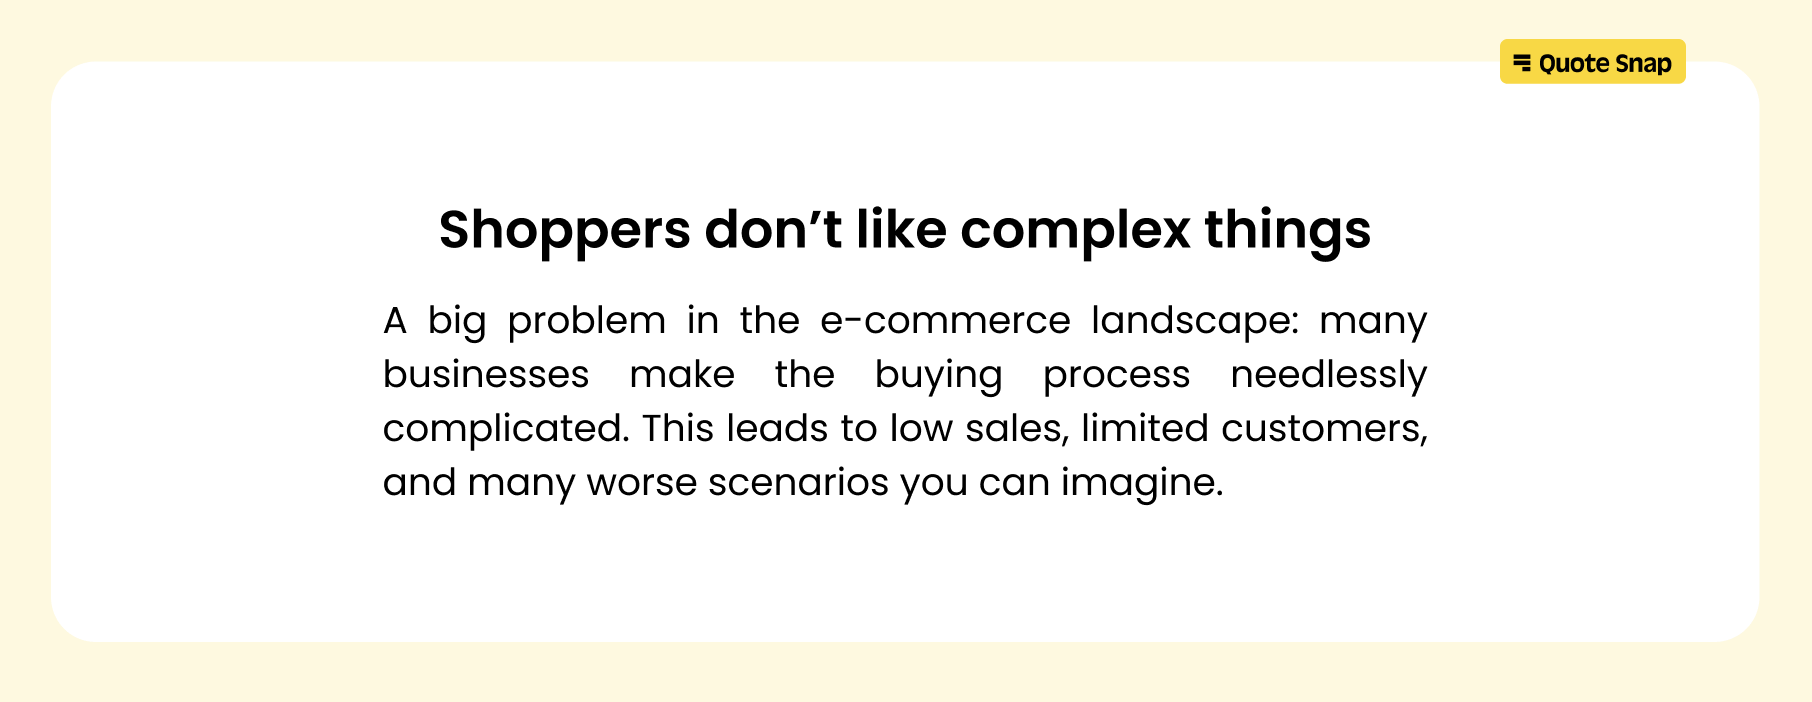 Shoppers don't like complex things